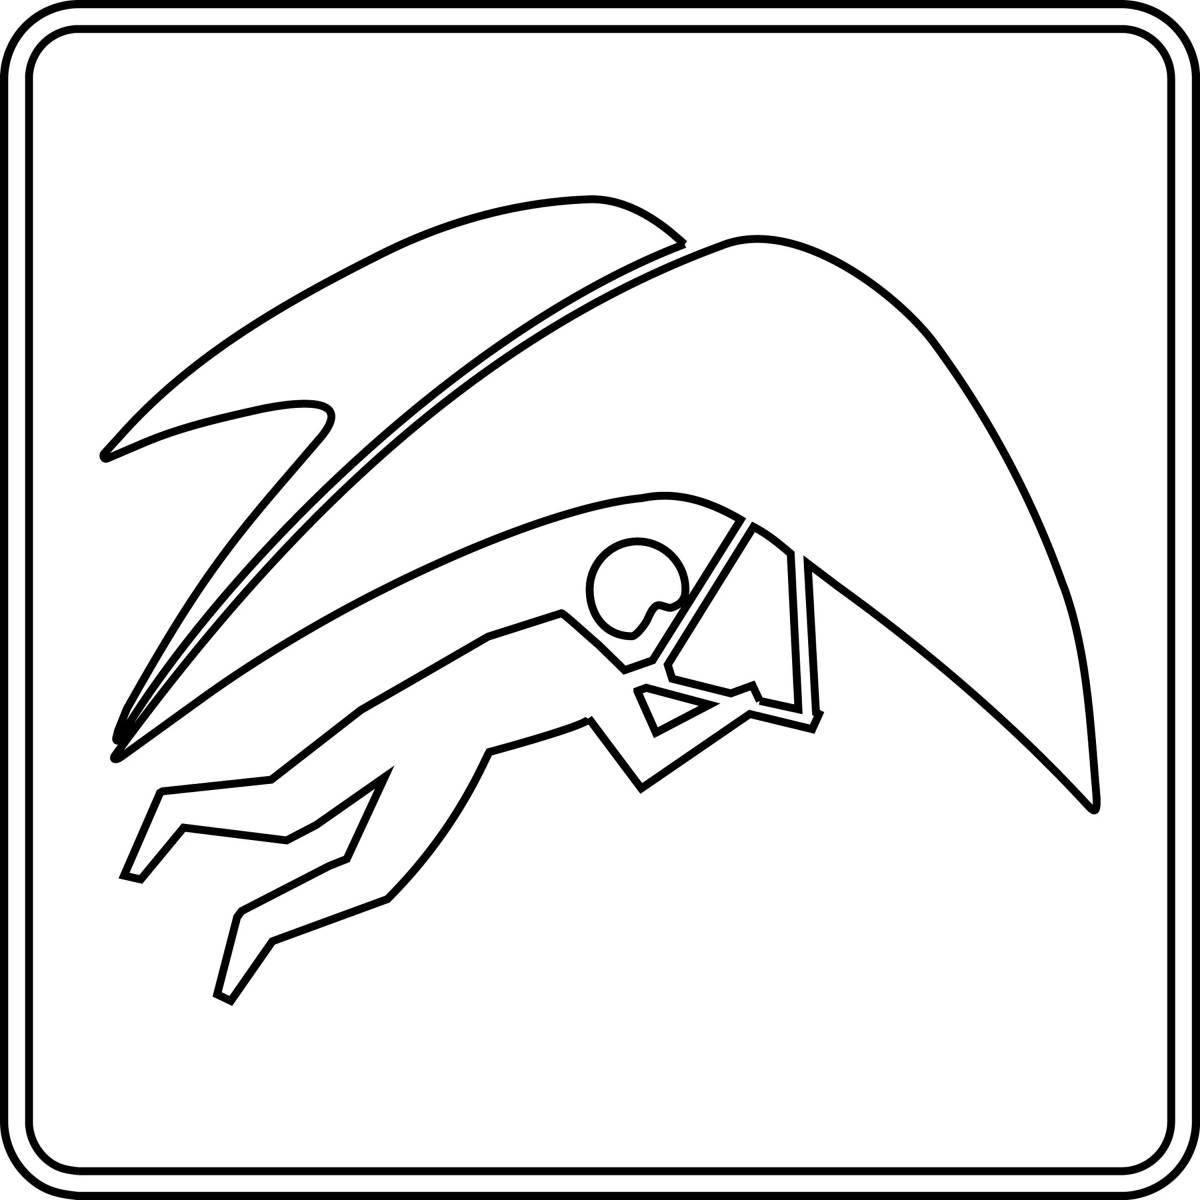 Coloring page funny hang glider